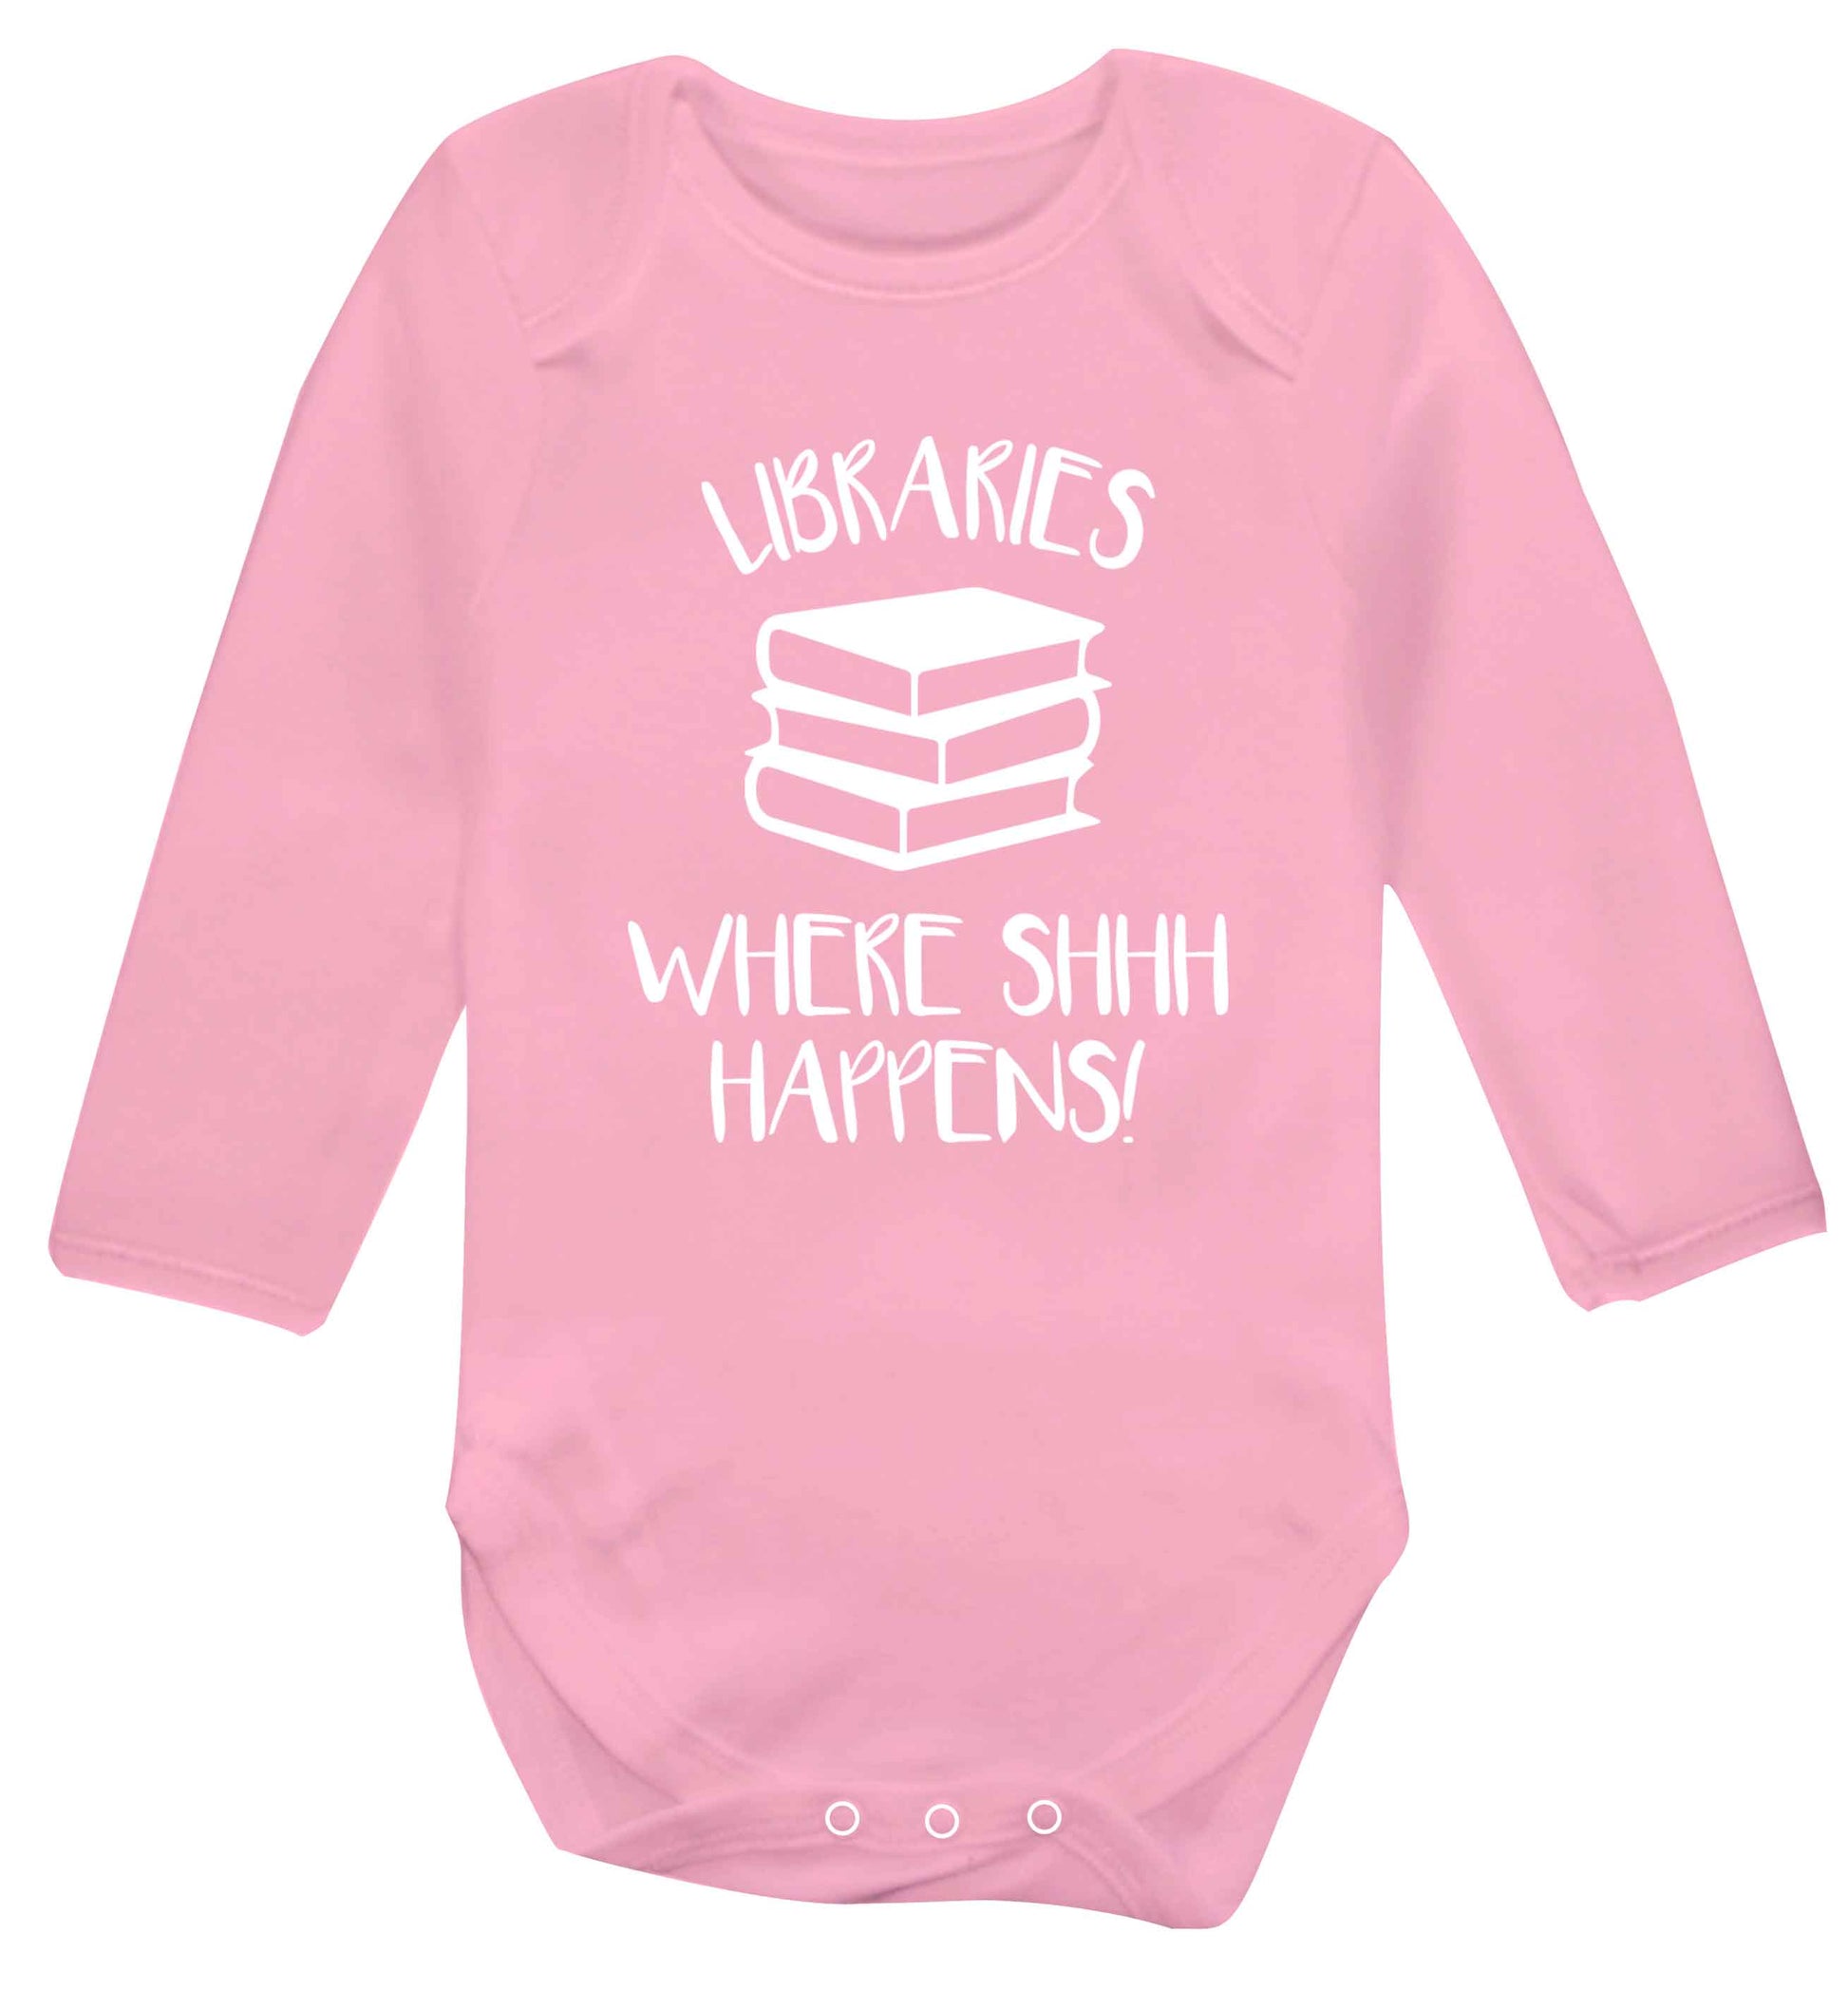 Libraries where shh happens! Baby Vest long sleeved pale pink 6-12 months